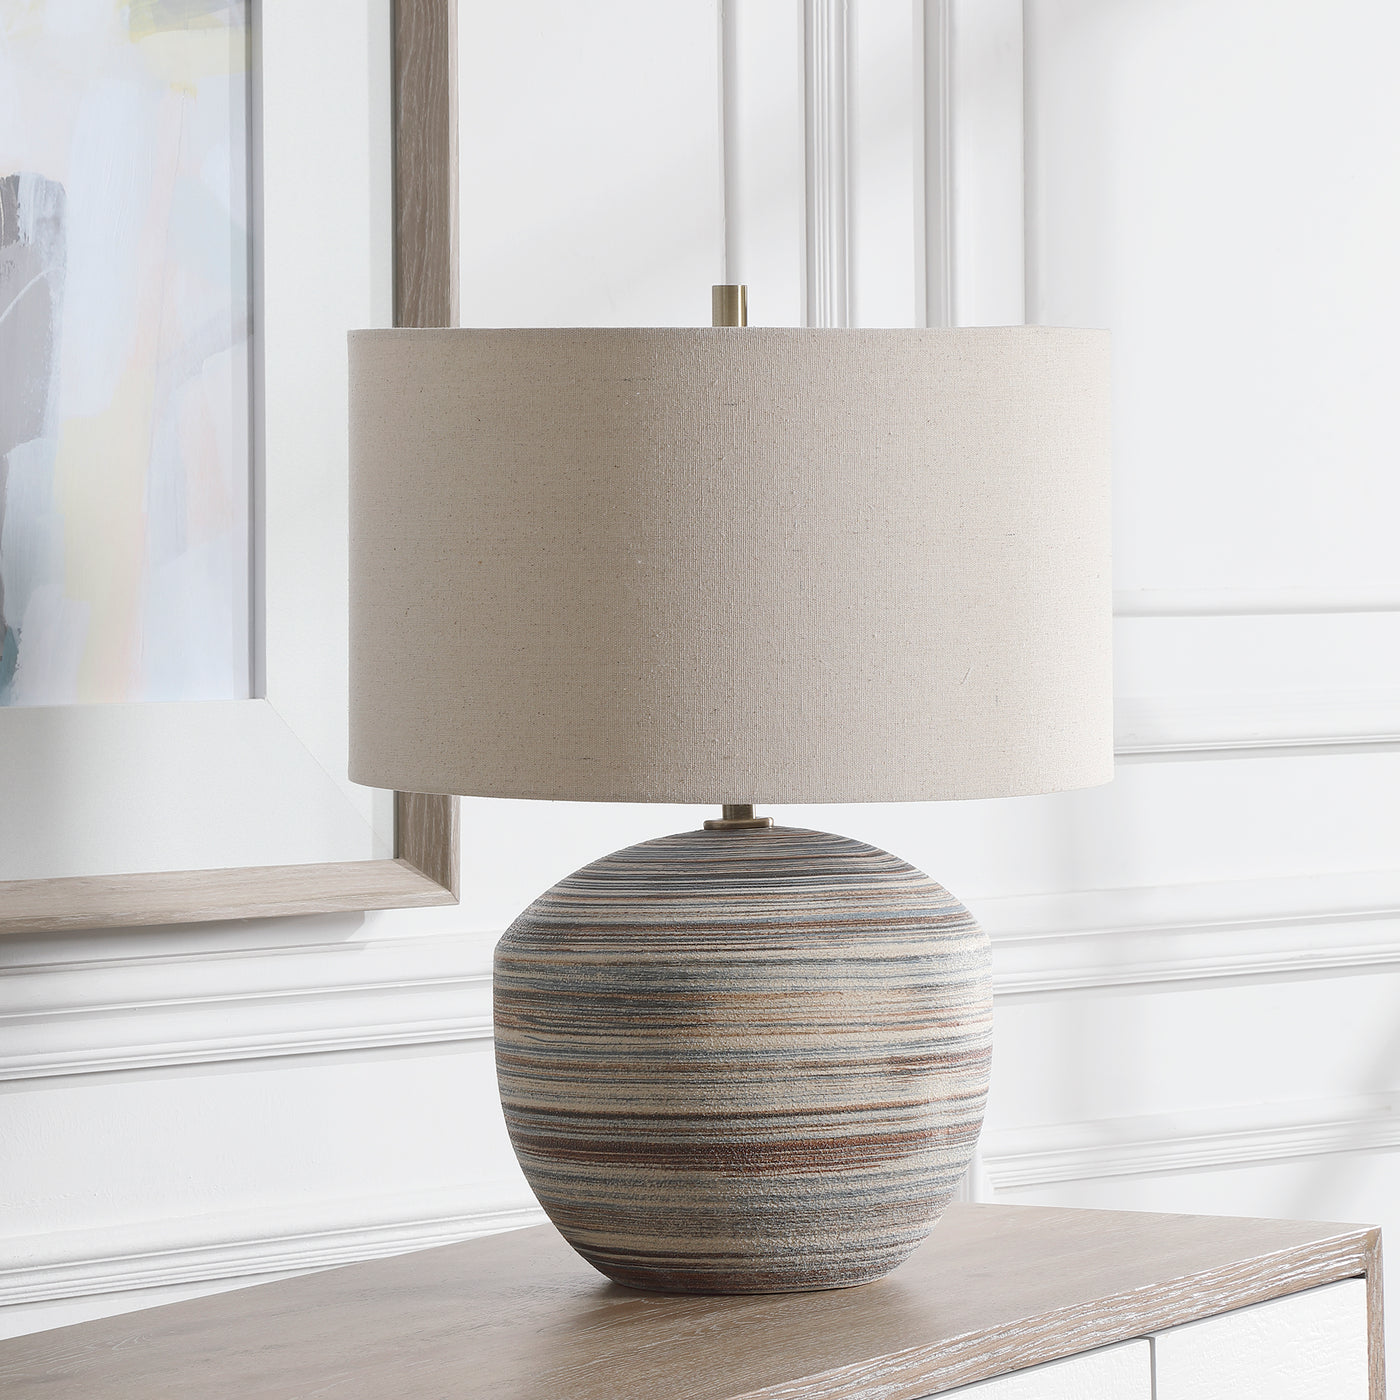 This Ceramic Accent Lamp Features A Striped Motif In Neutral Shades Of Brown, Taupe, Cream And Blue Accented By Light Brus...